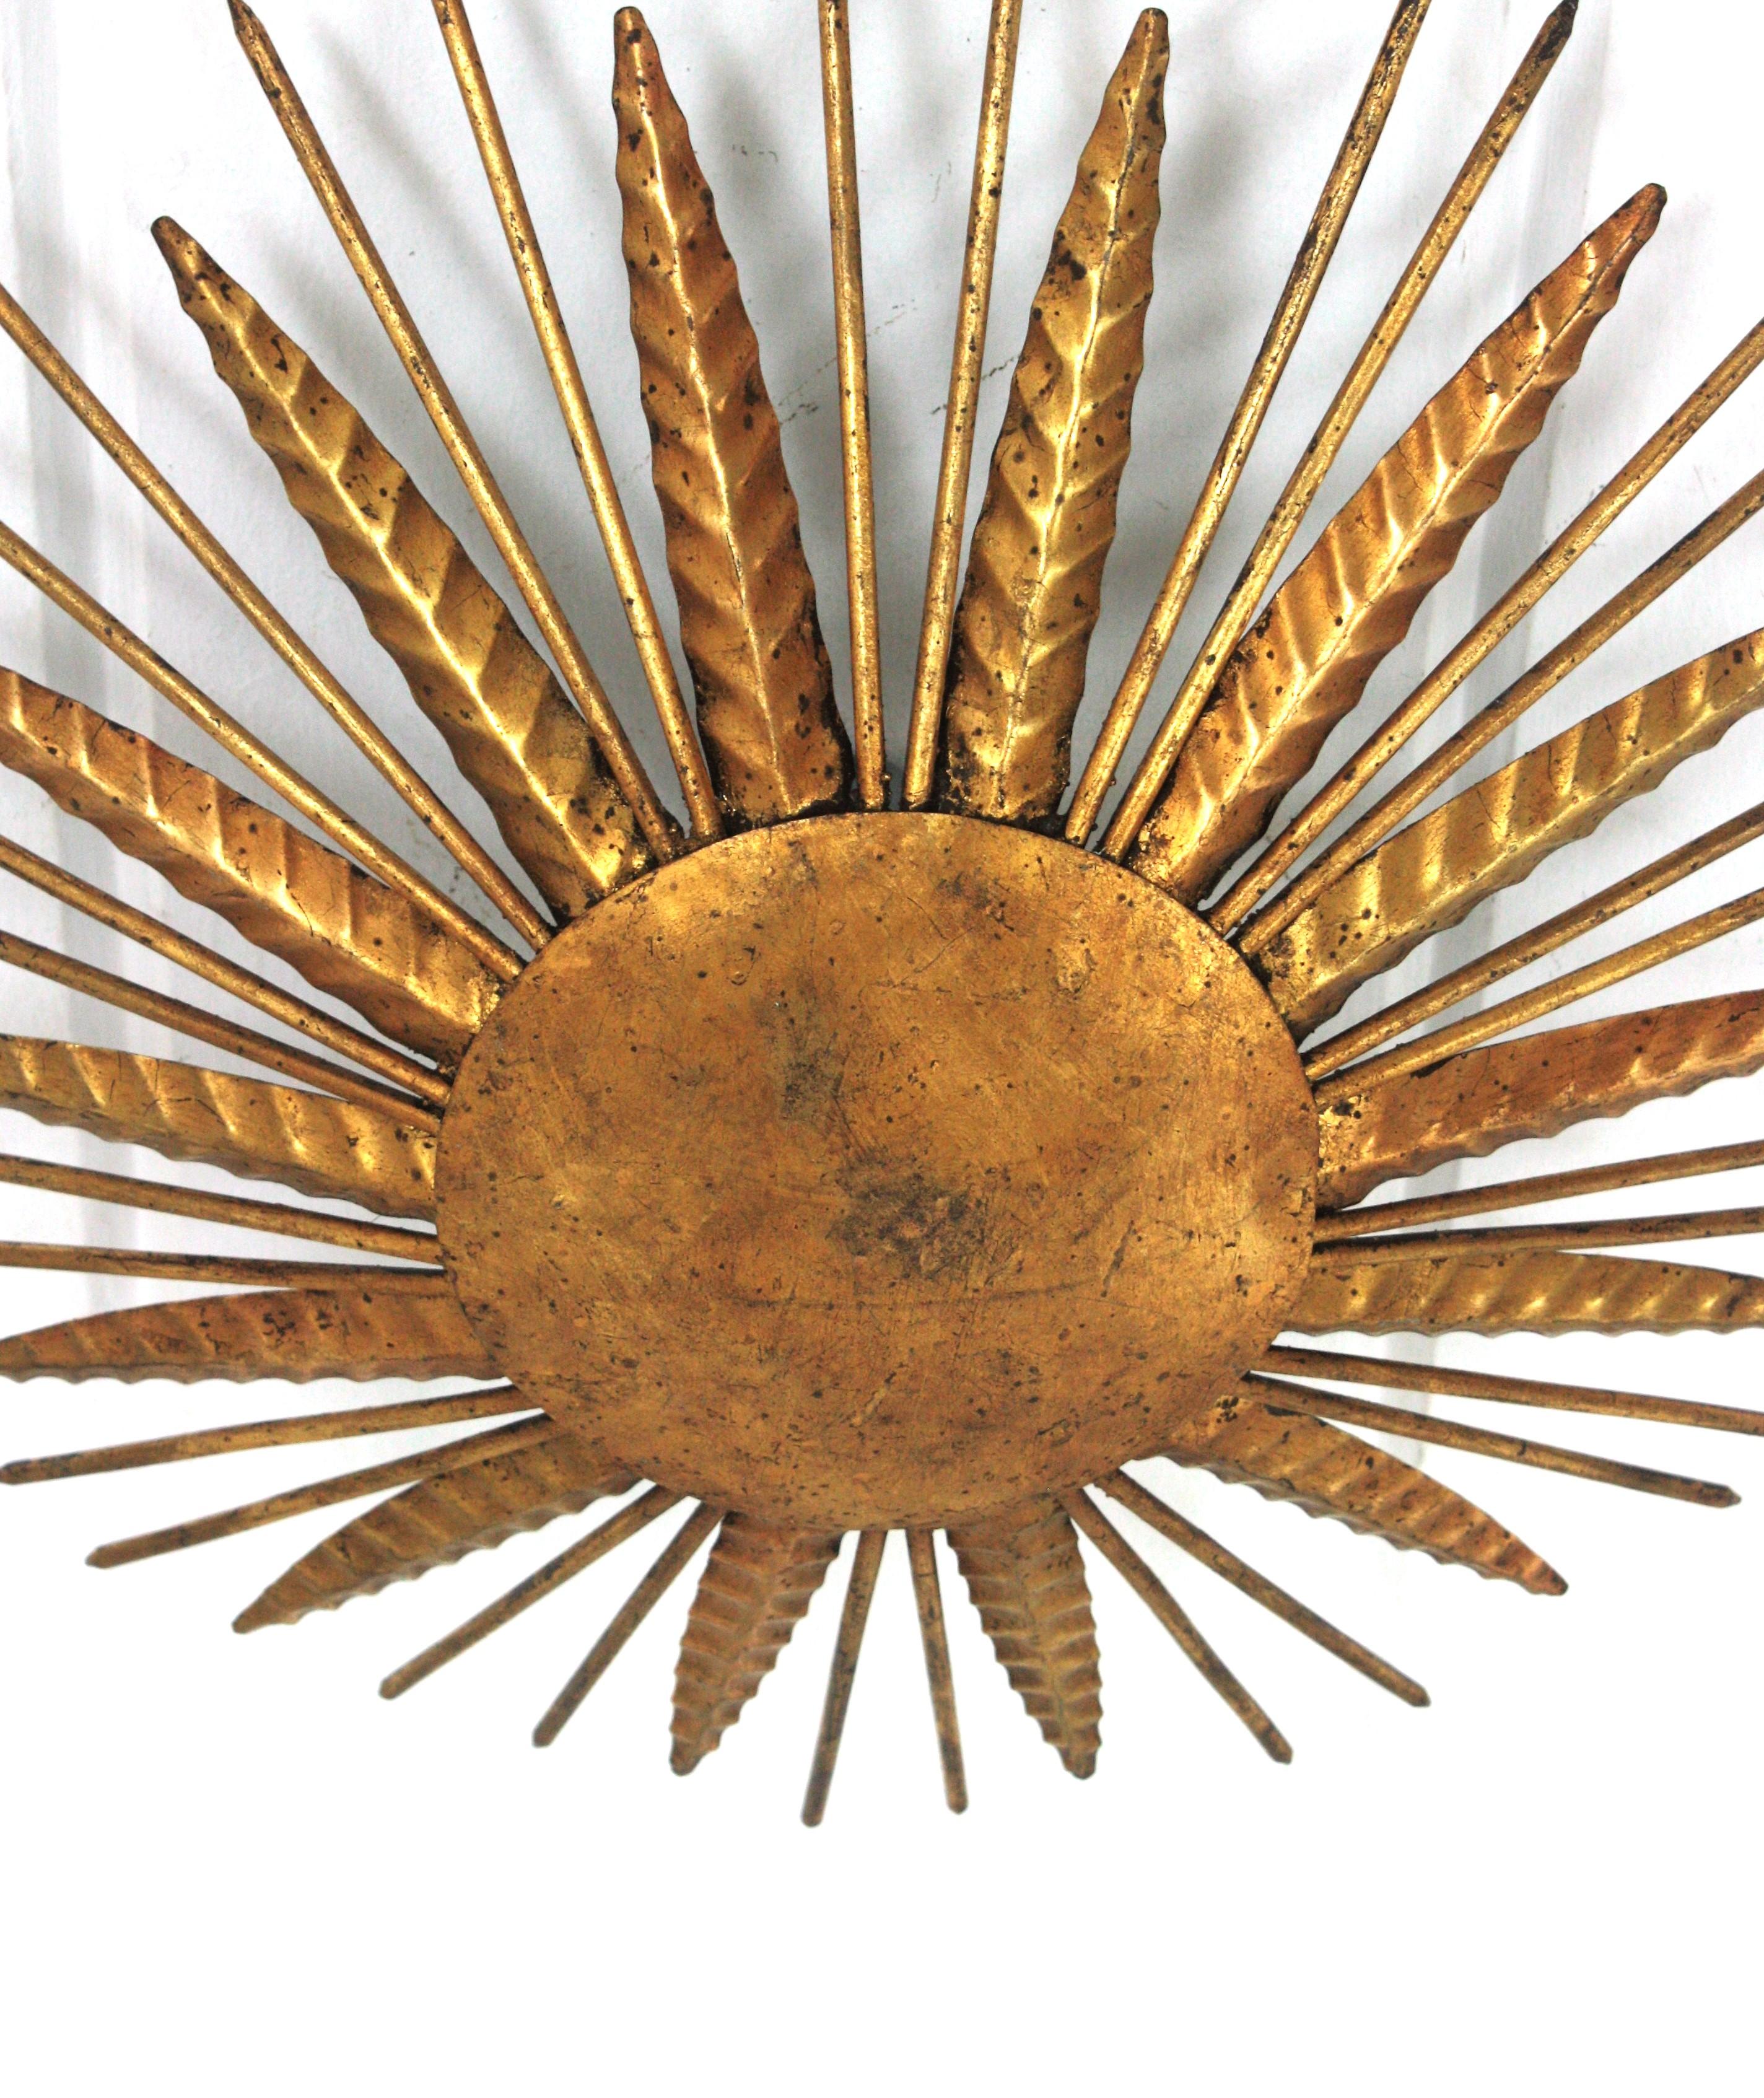 French Sunburst Spikey Light Fixture in Gilt Iron, 1940s For Sale 3